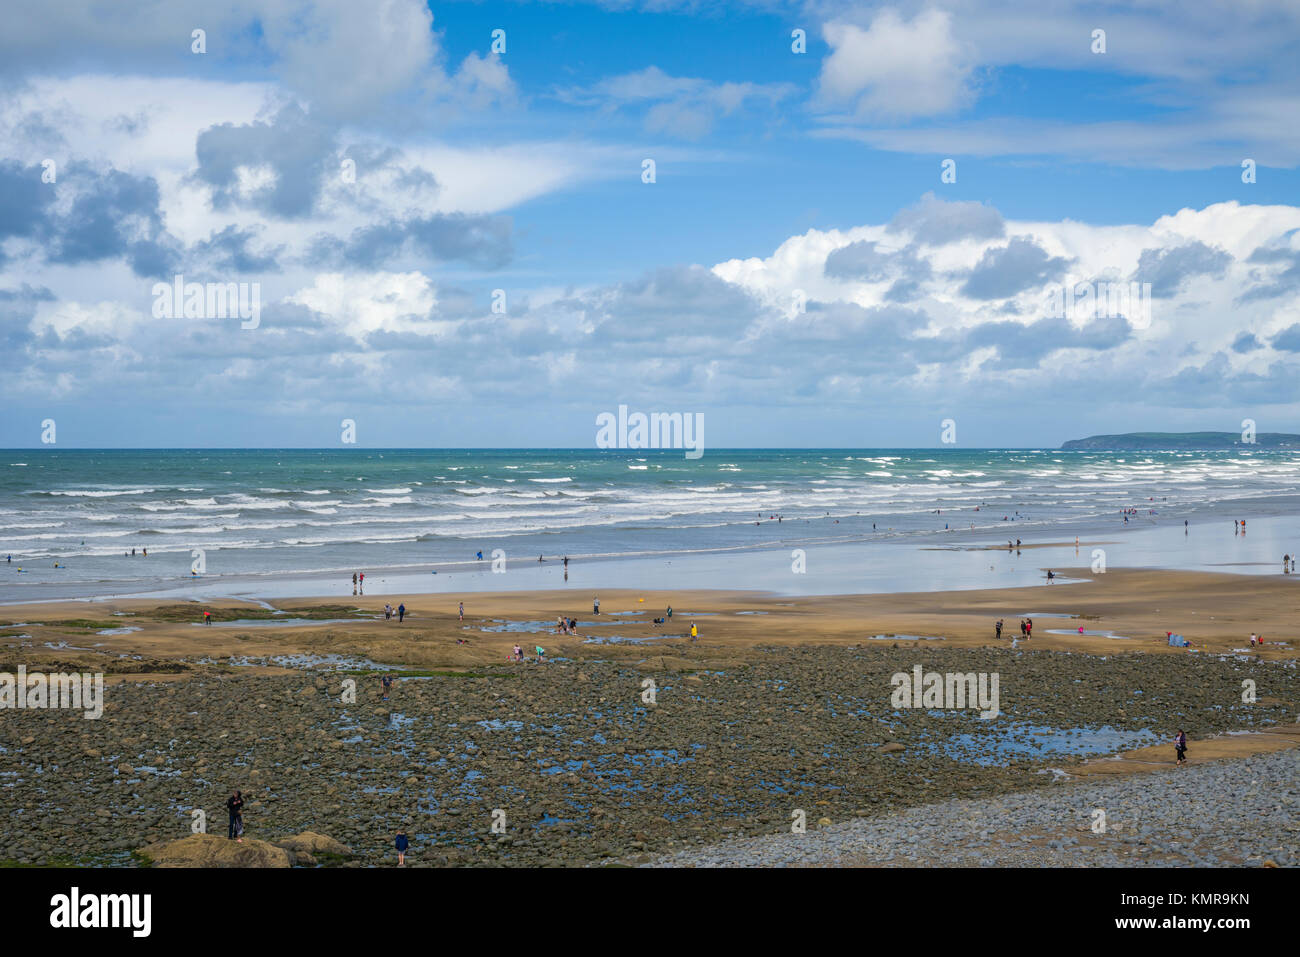 People enjoying a summers day on the beach at Westward Ho! on the North Devon coast, England. Stock Photo